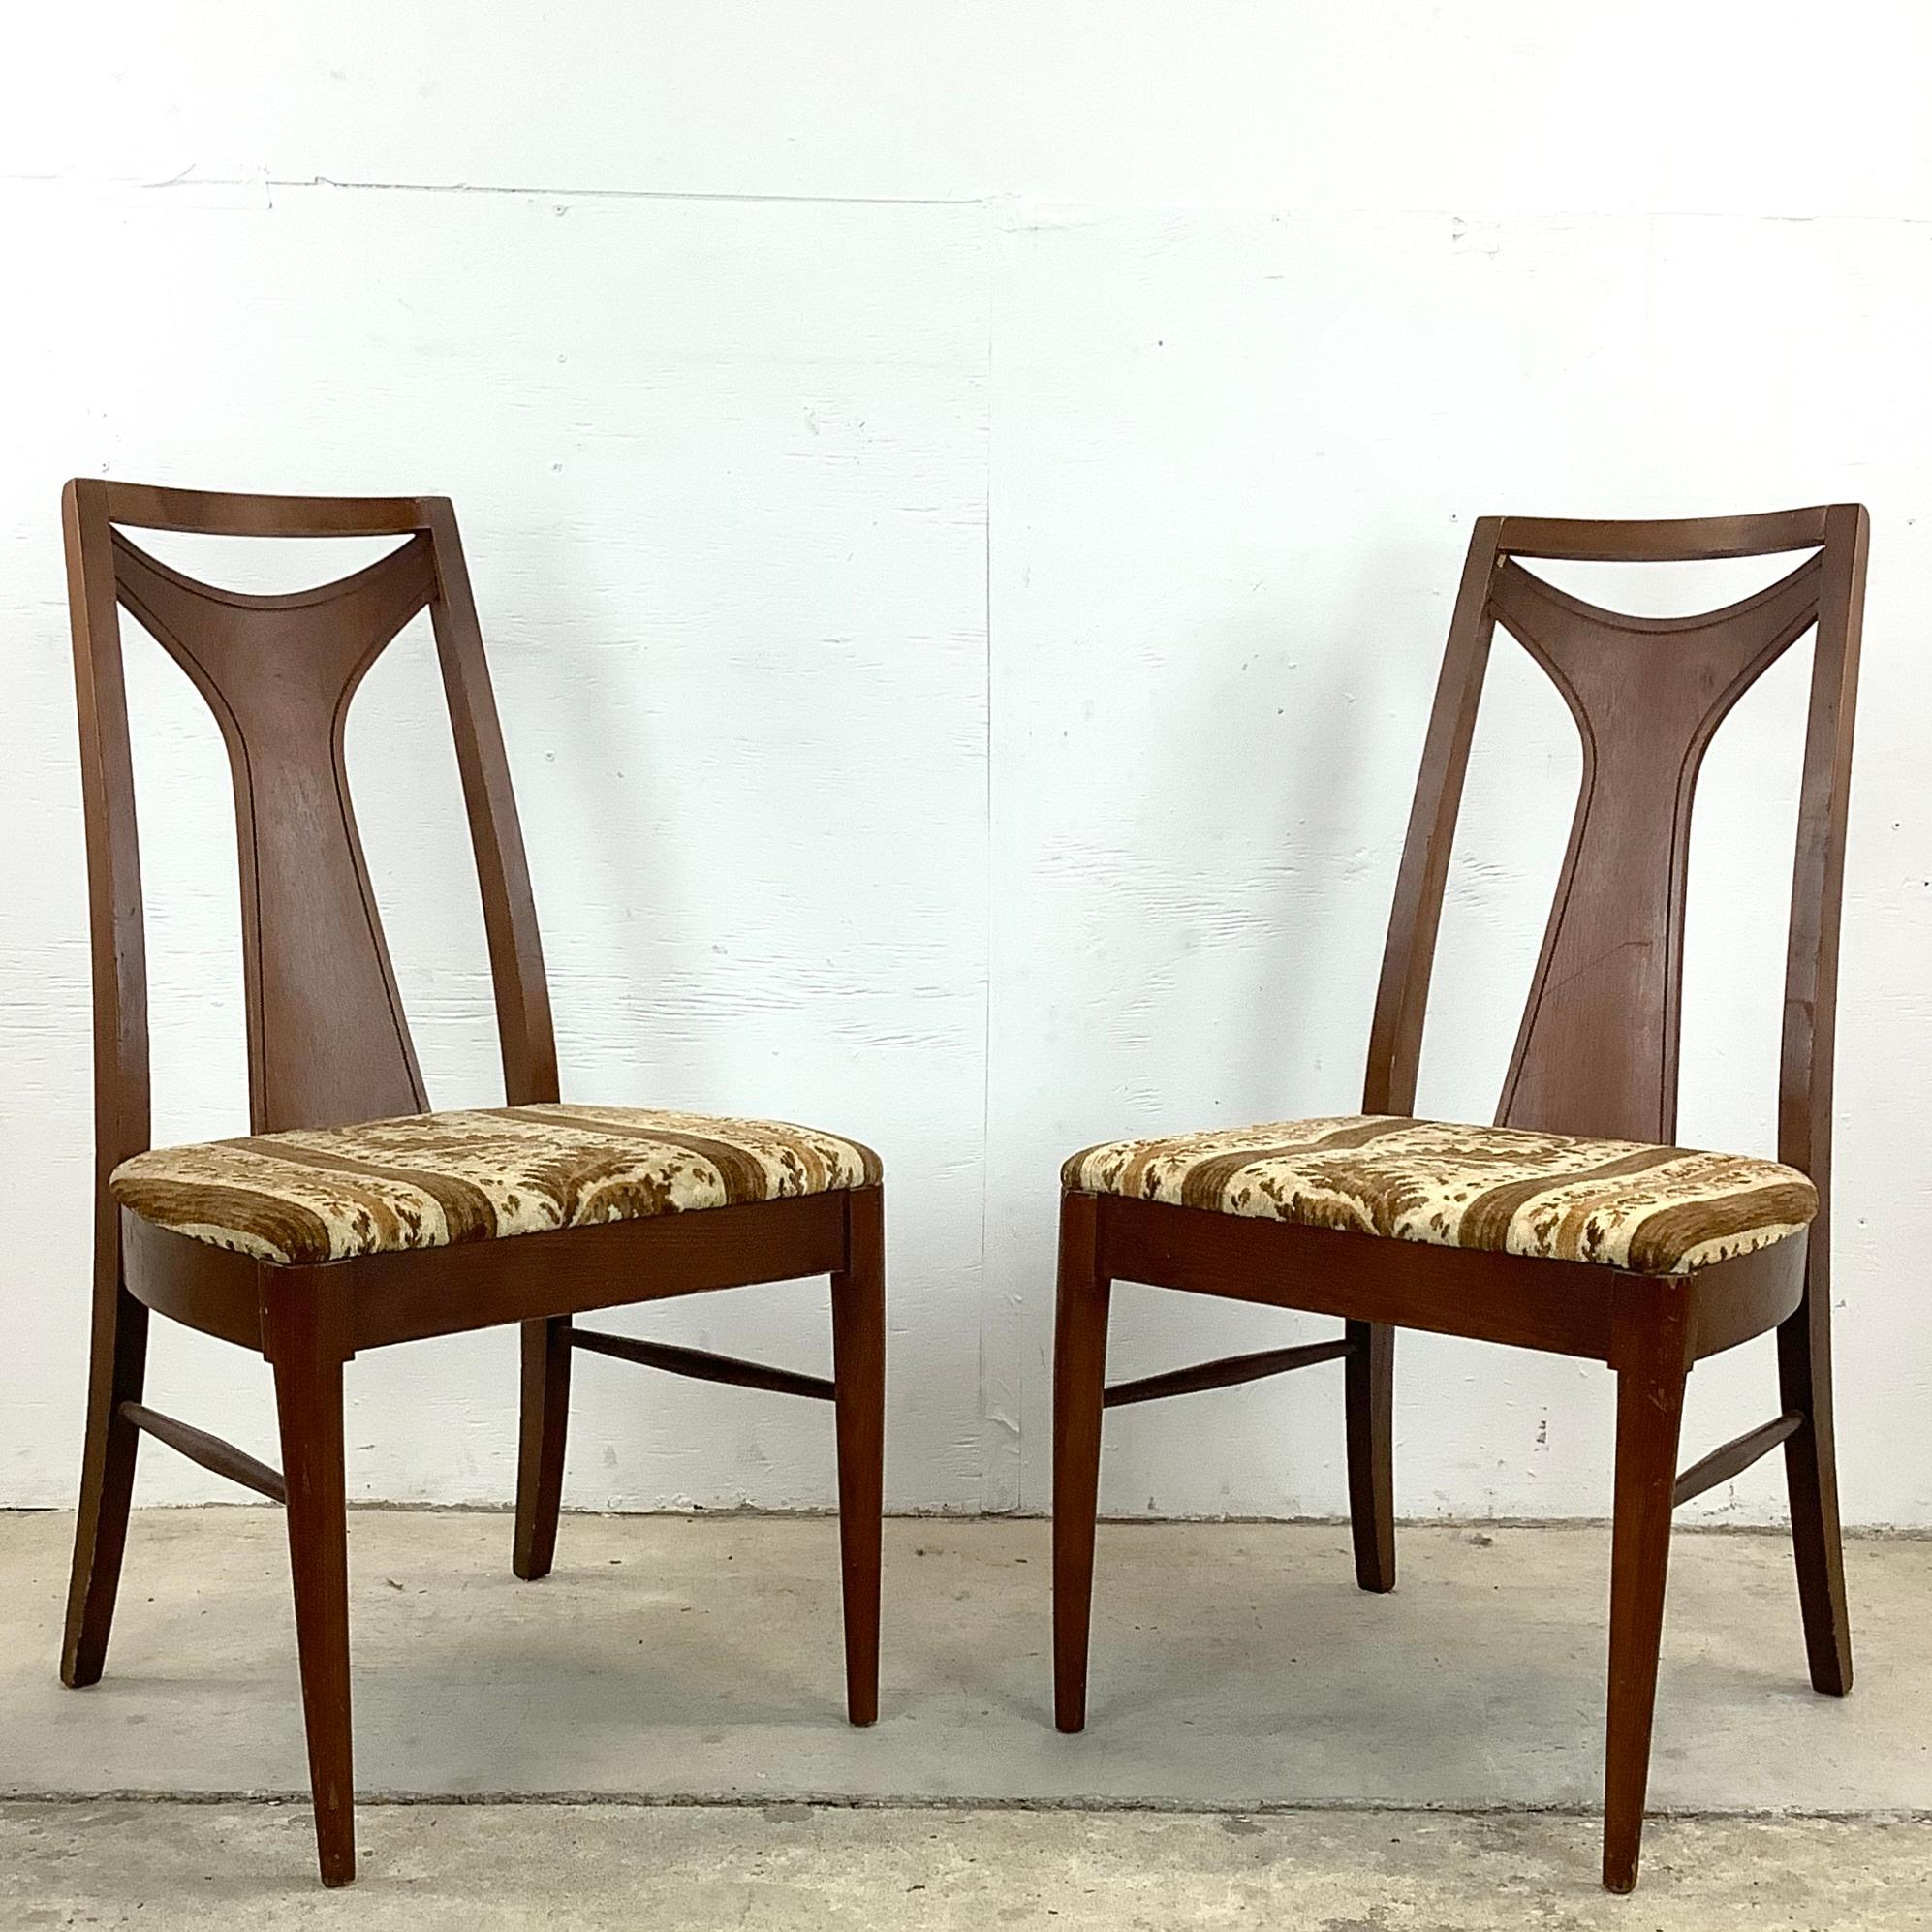 Indulge in the fusion of form and function with this elegant pair of Mid-Century Modern Dining Chairs. Designed to elevate any dining experience, these chairs are a true nod to the sophistication and innovative design of the era.

These side chairs